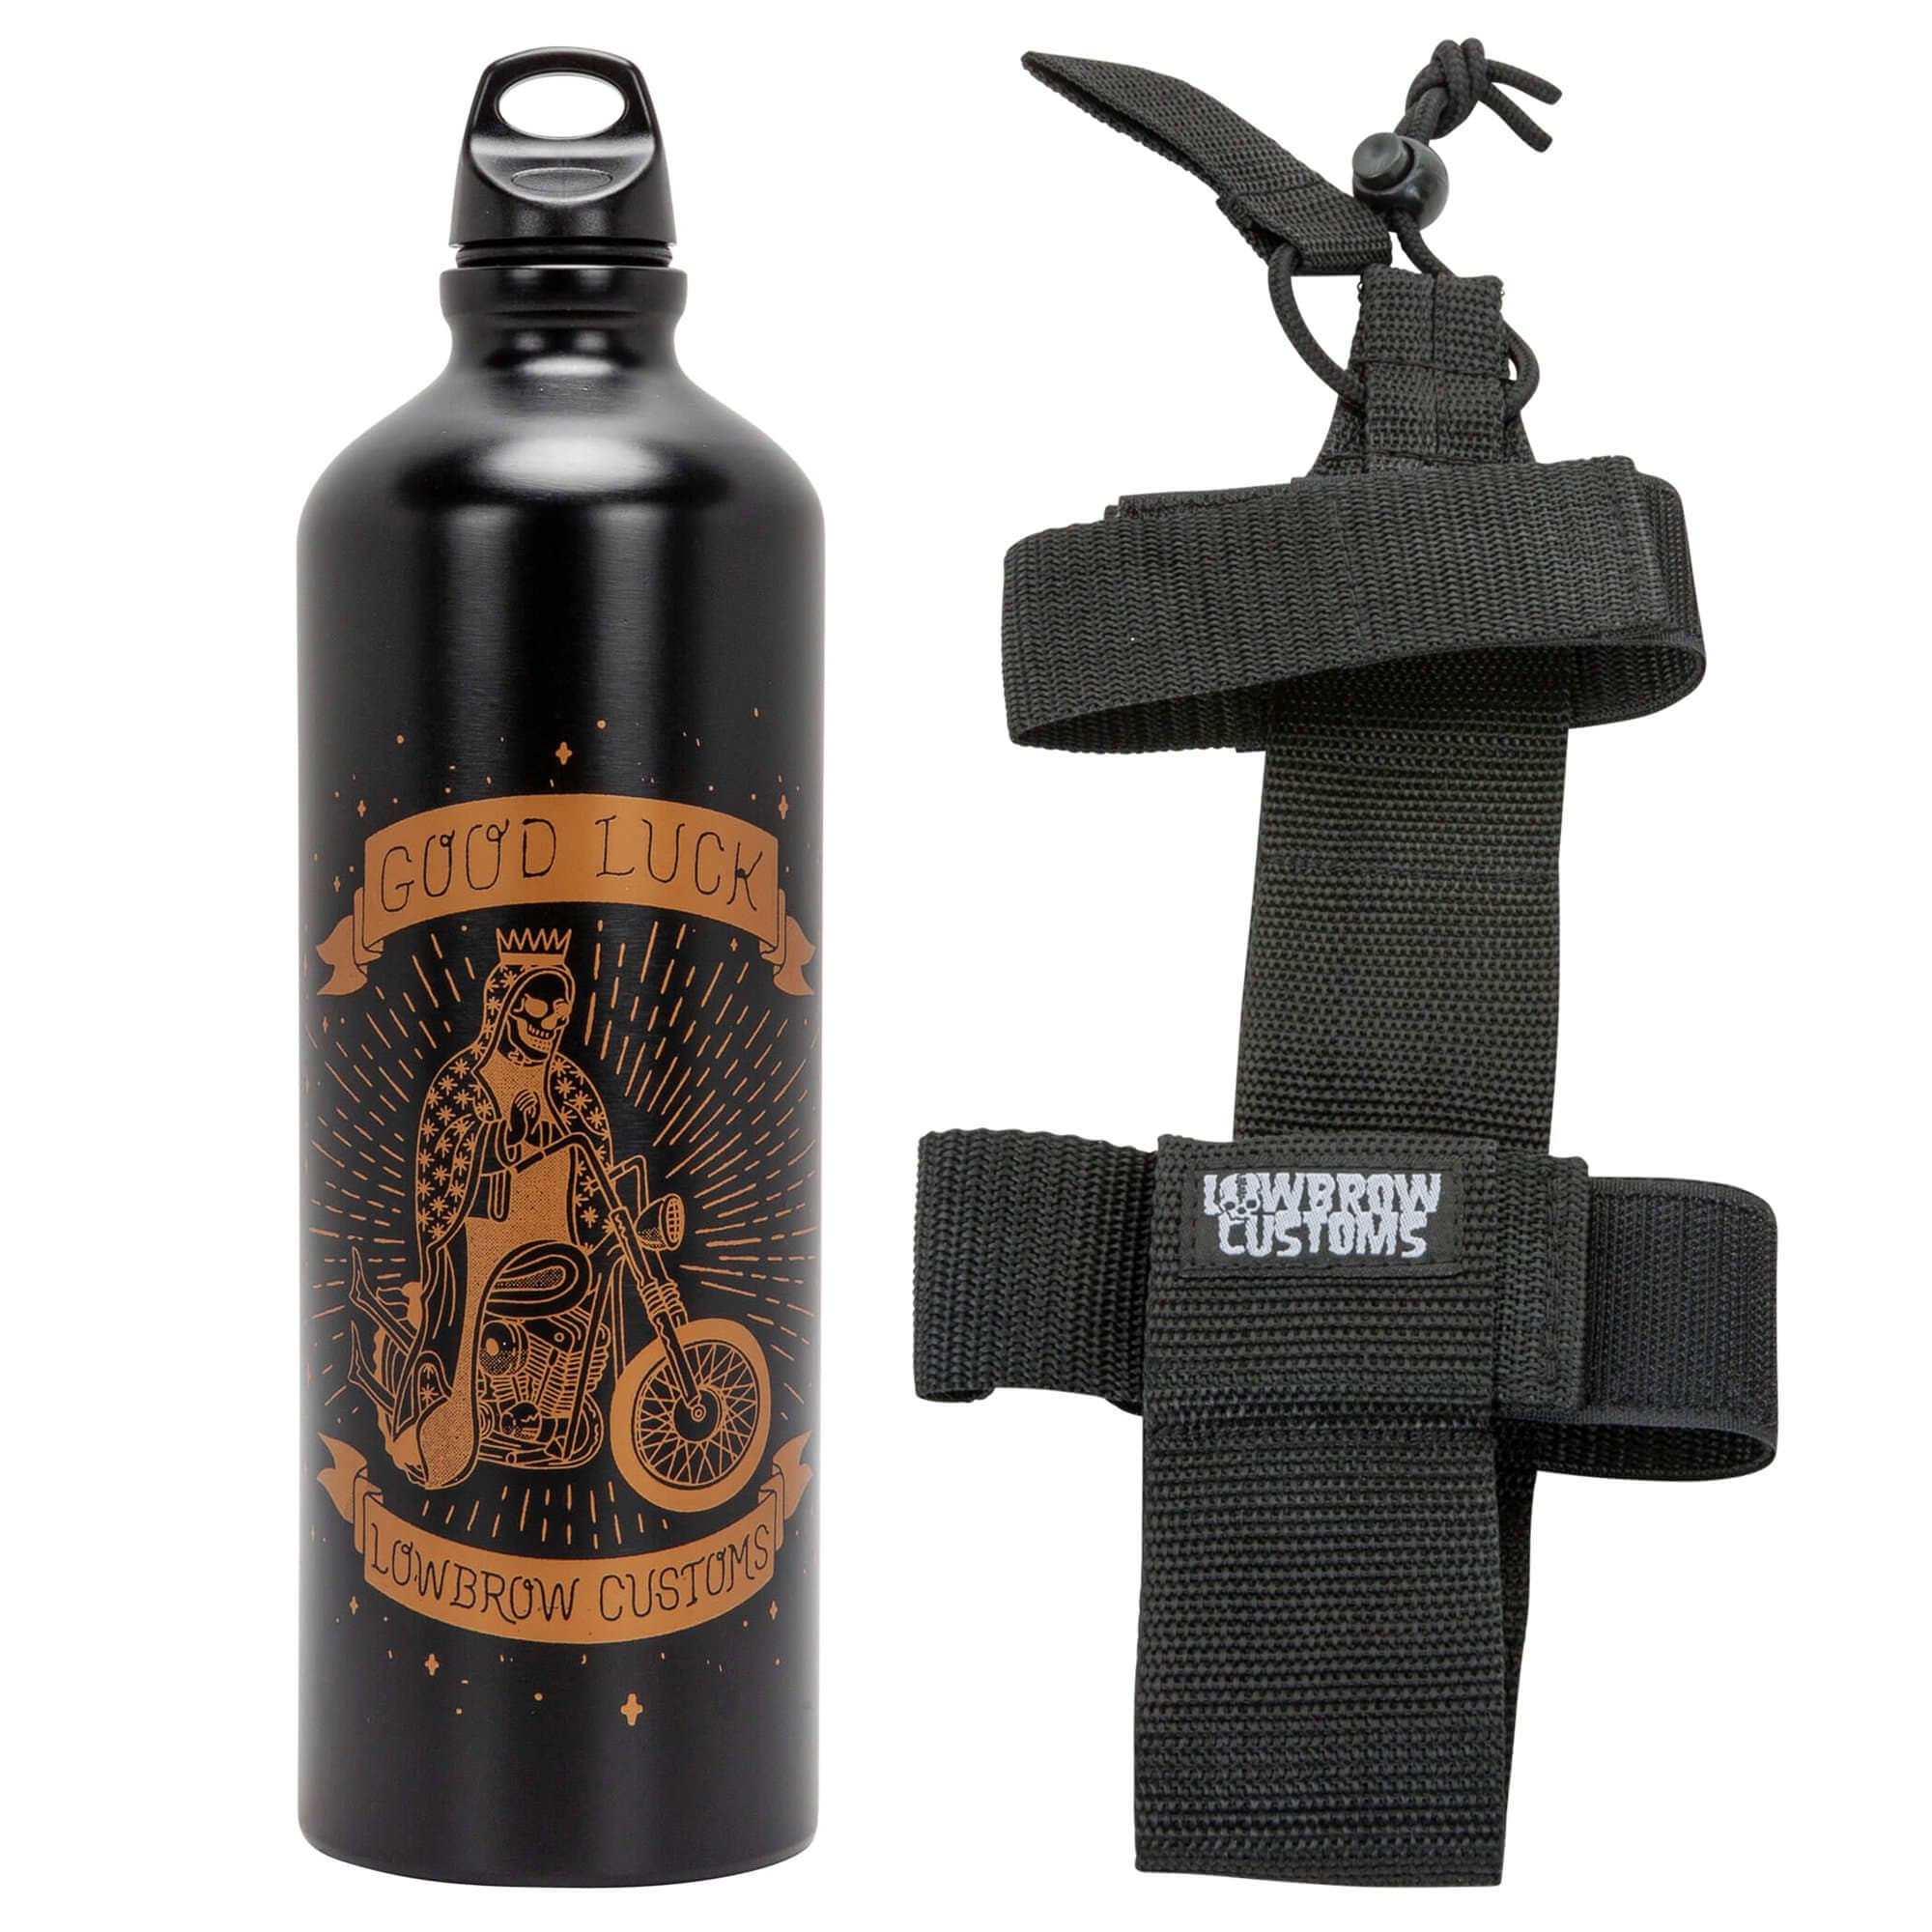 Lowbrow Customs Good Luck Fuel Reserve Bottle and Carrier Combo